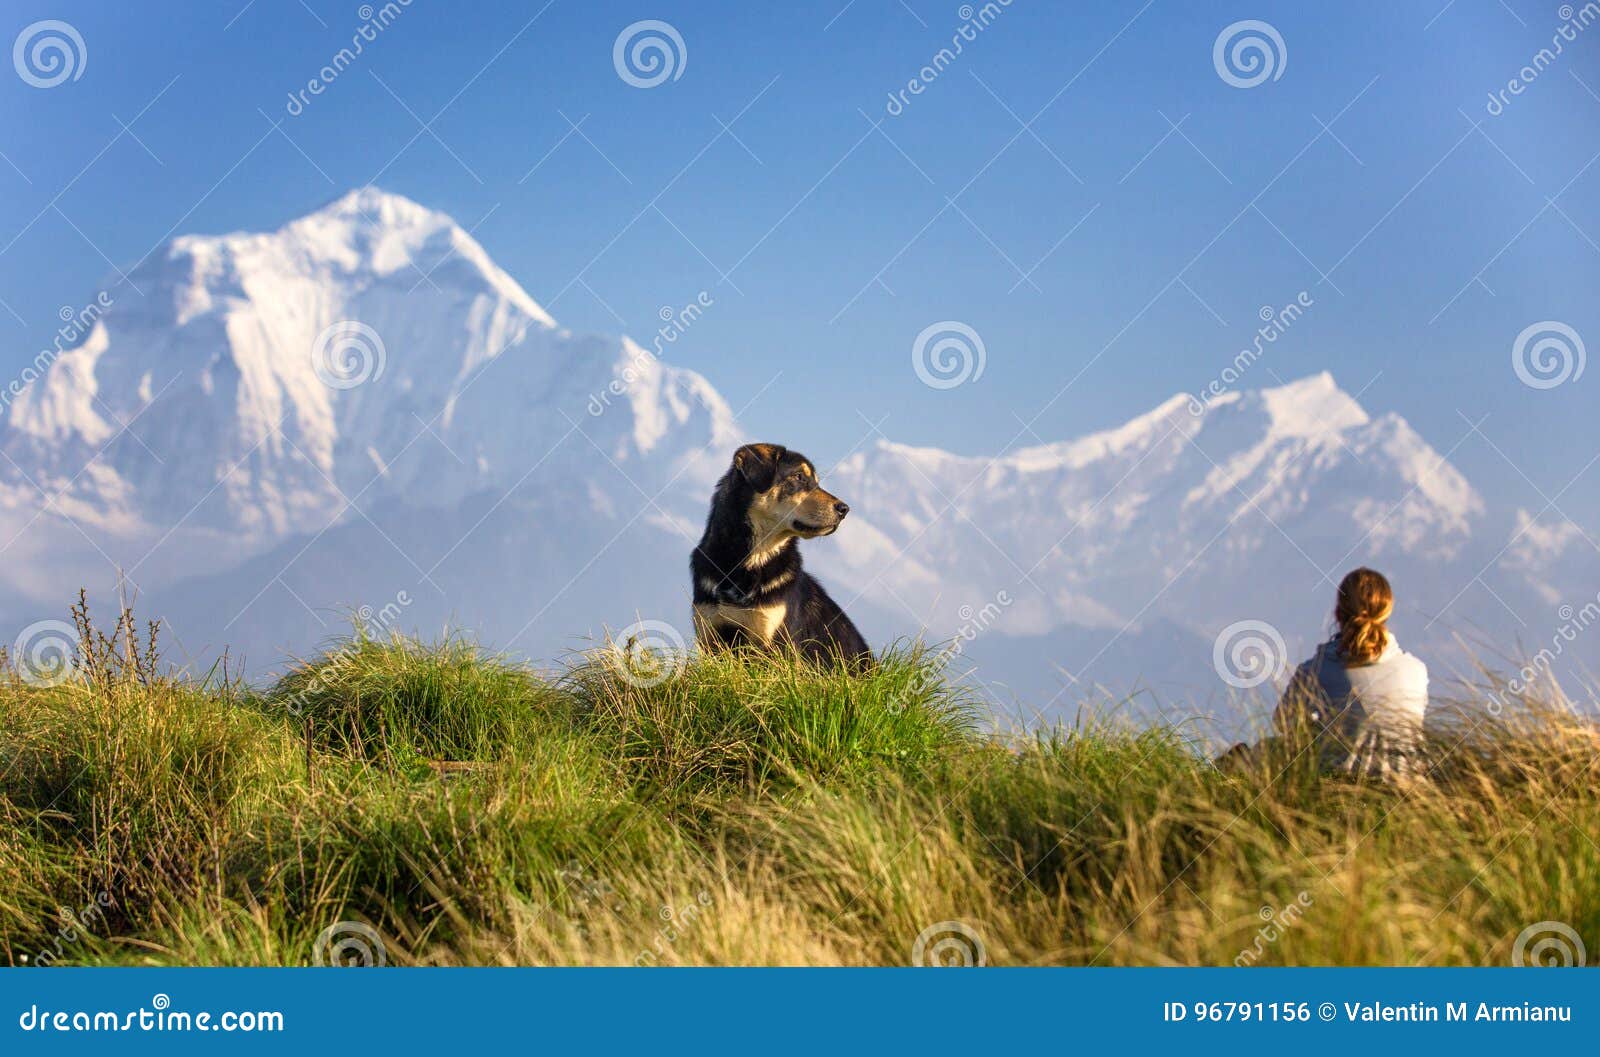 woman and dog at poon hill in himalayas